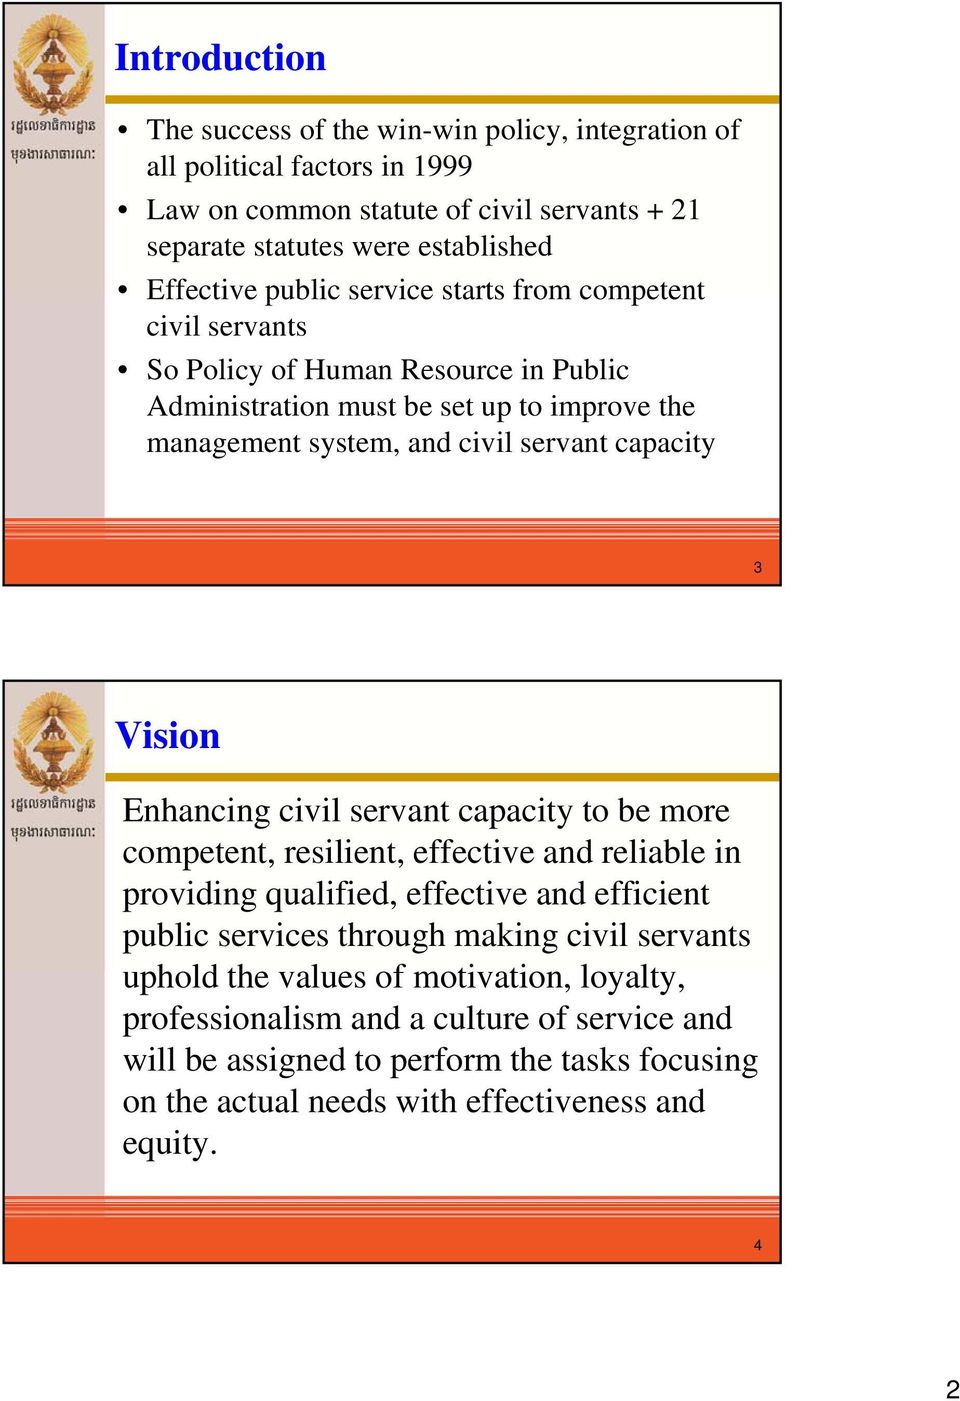 Vision Enhancing civil servant capacity to be more competent, resilient, effective and reliable in providing qualified, effective and efficient public services through making civil